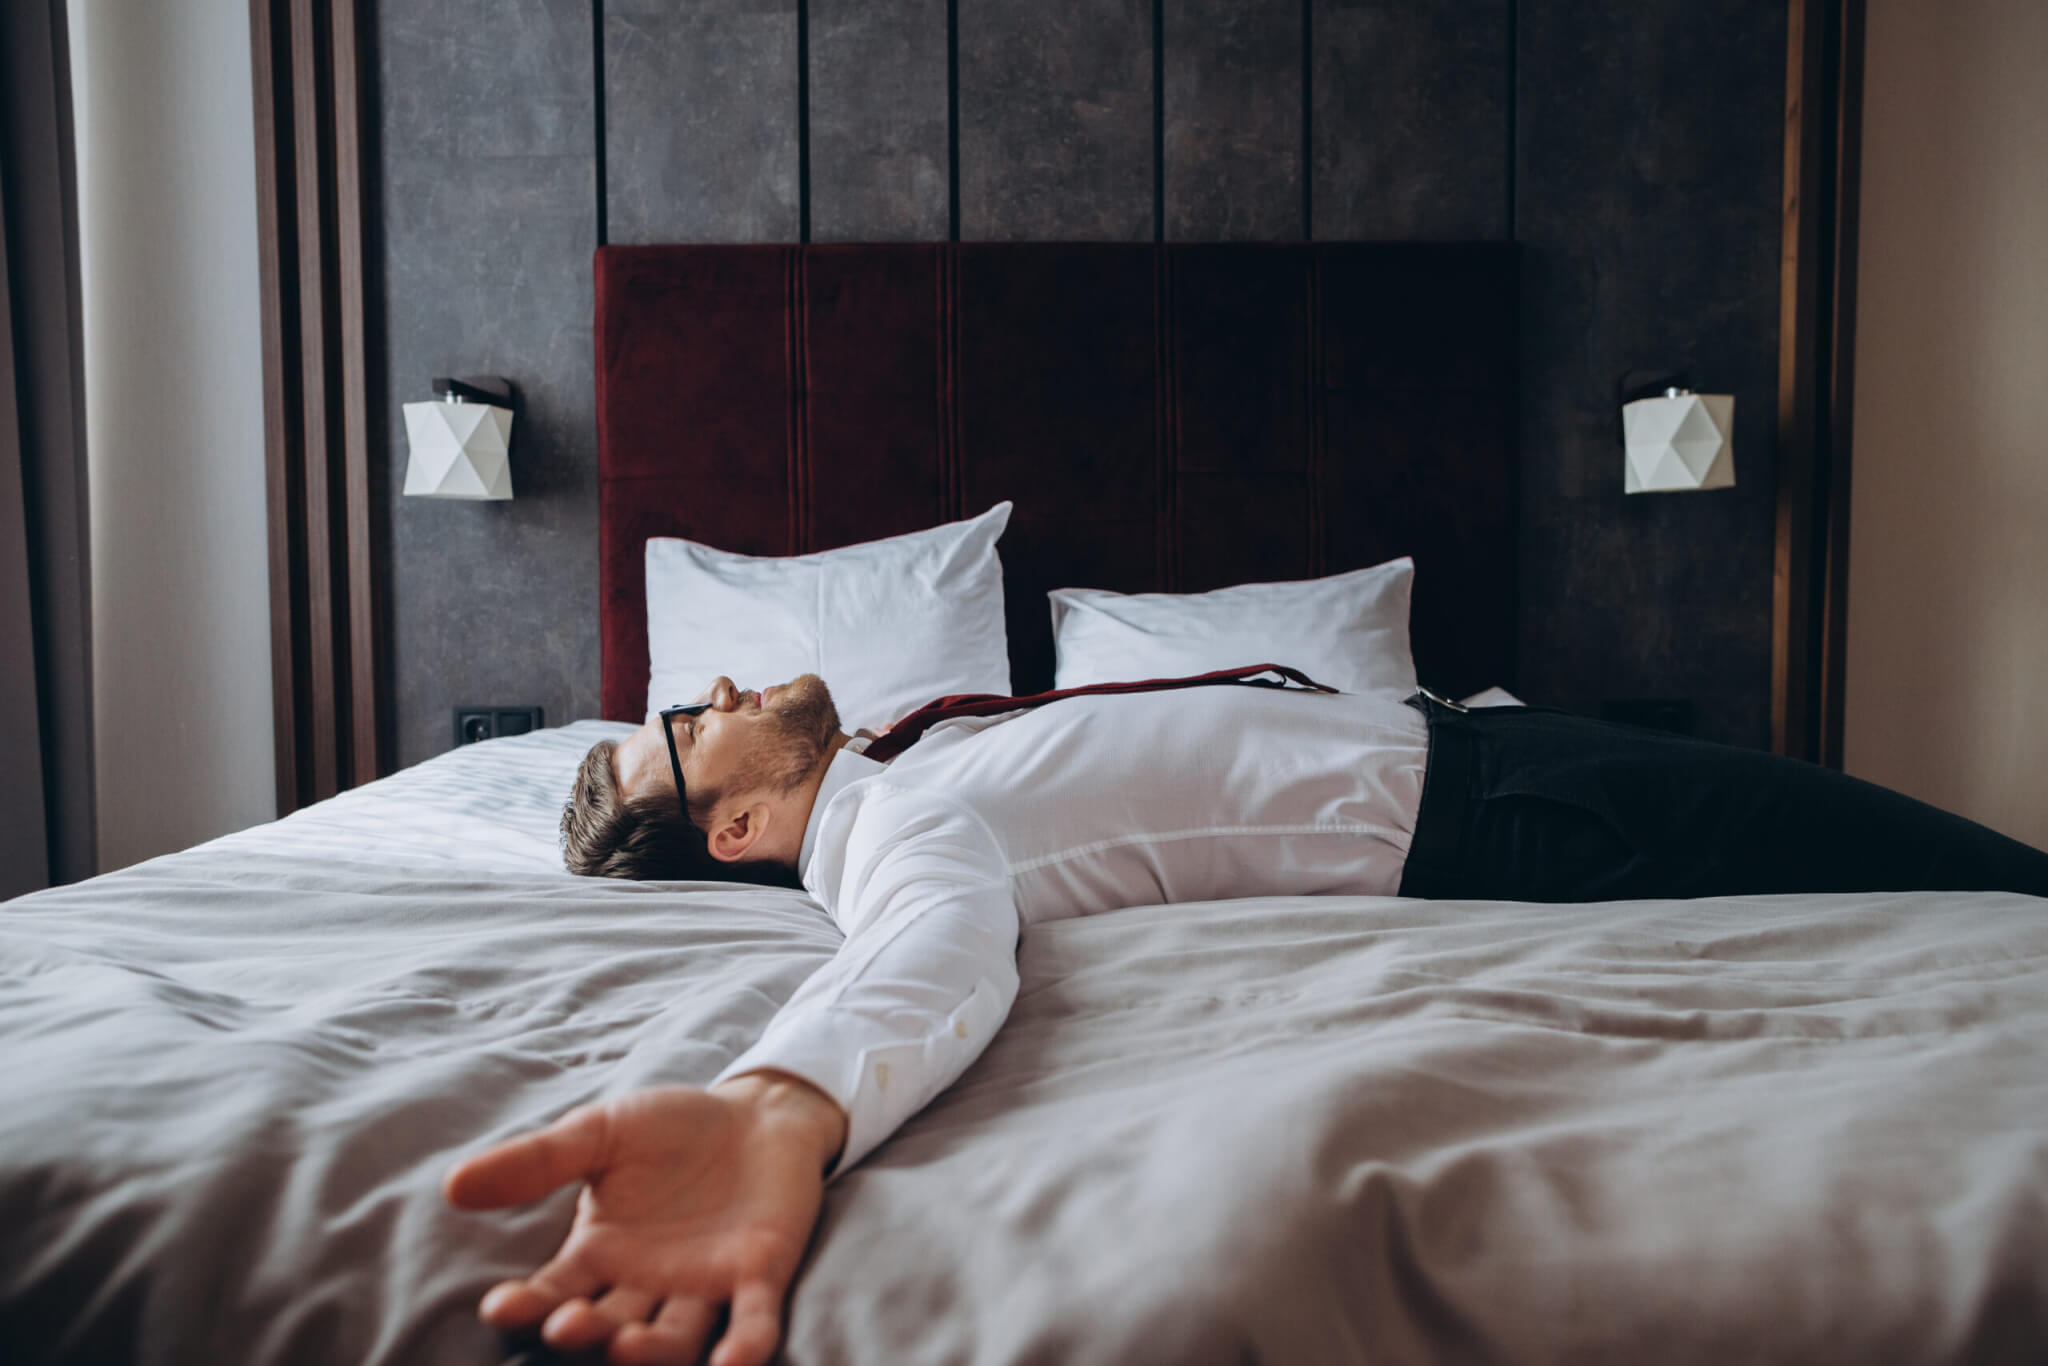 Exhausted businessman resting on bed after long air flight, jet lag. Man in business suit lying with arms outstretched on mattress in hotel room.